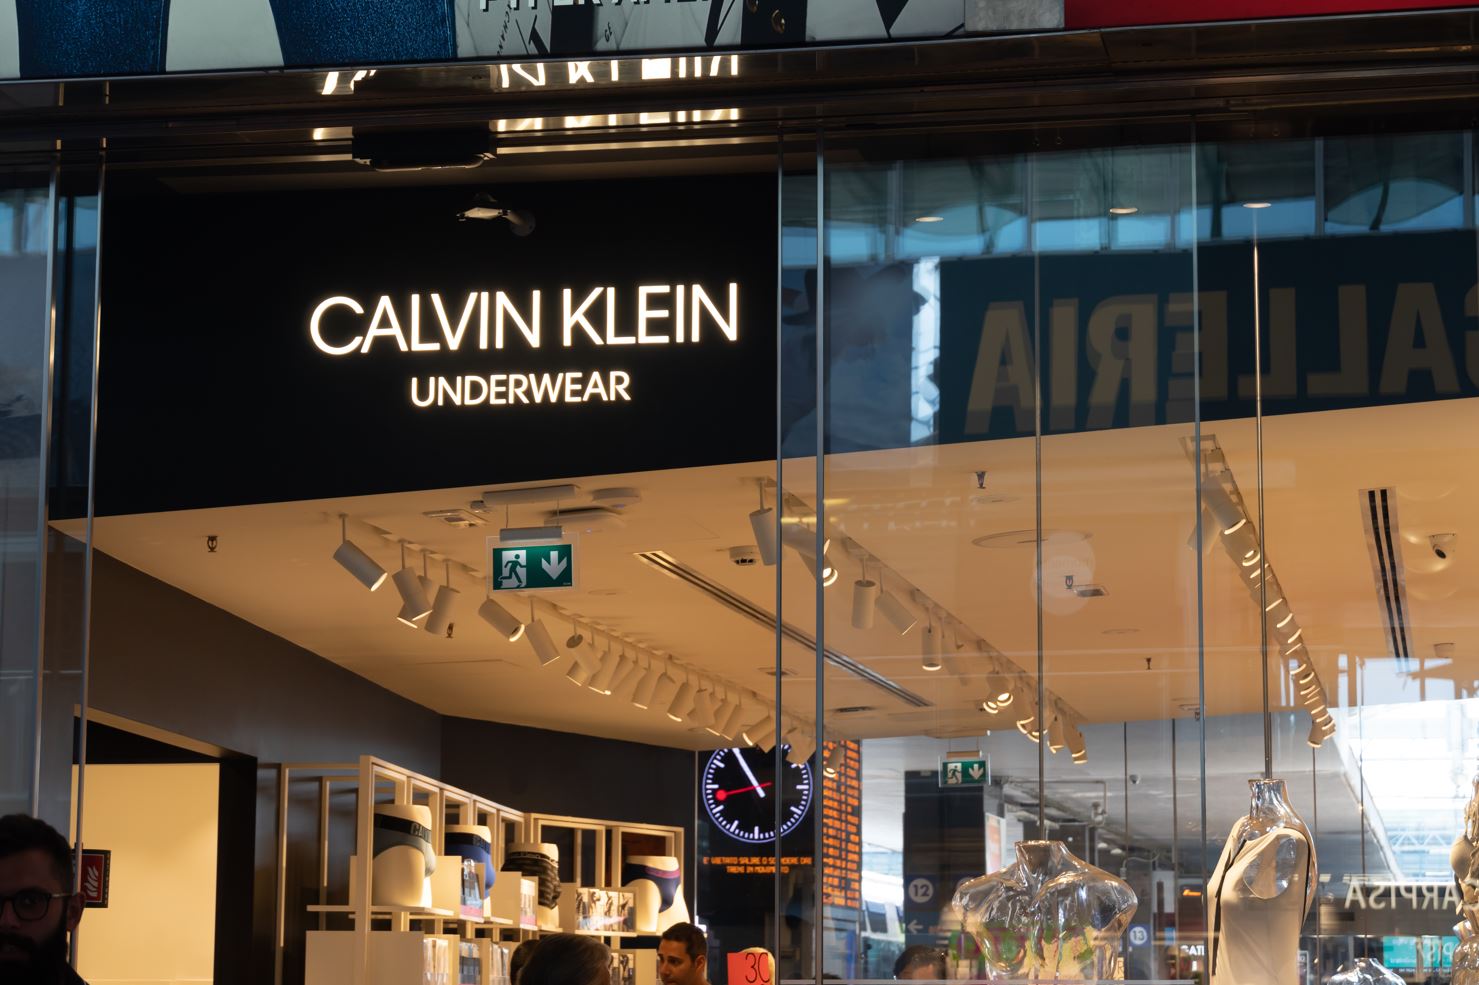 A Calvin Klein store in Rome, Italy